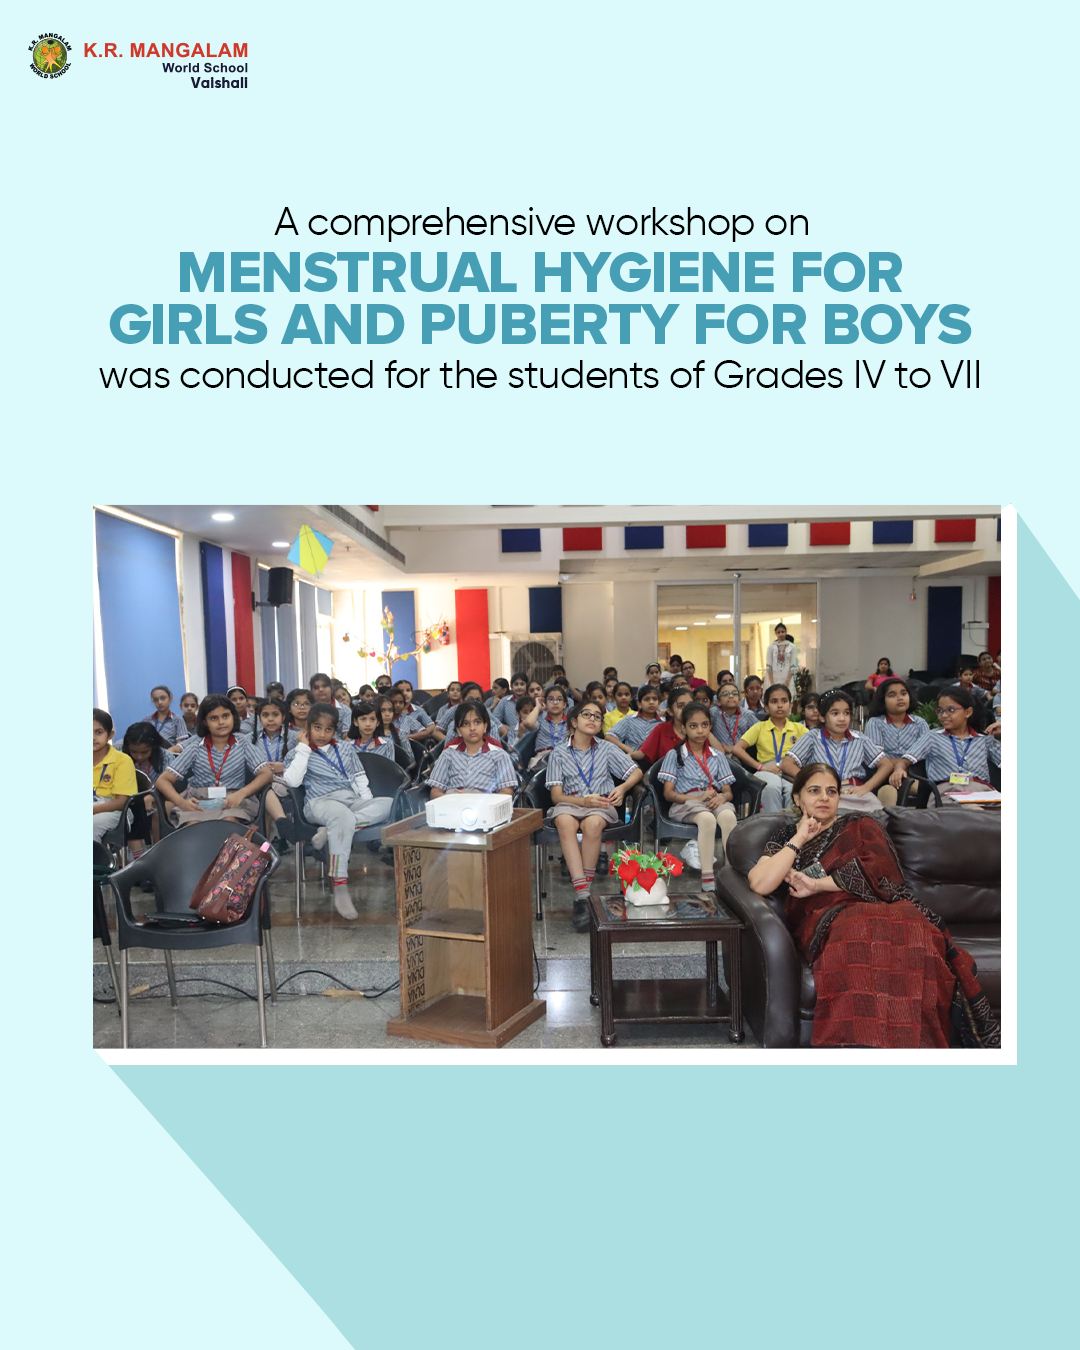 Workshop on Menstrual Hygiene and Puberty Education